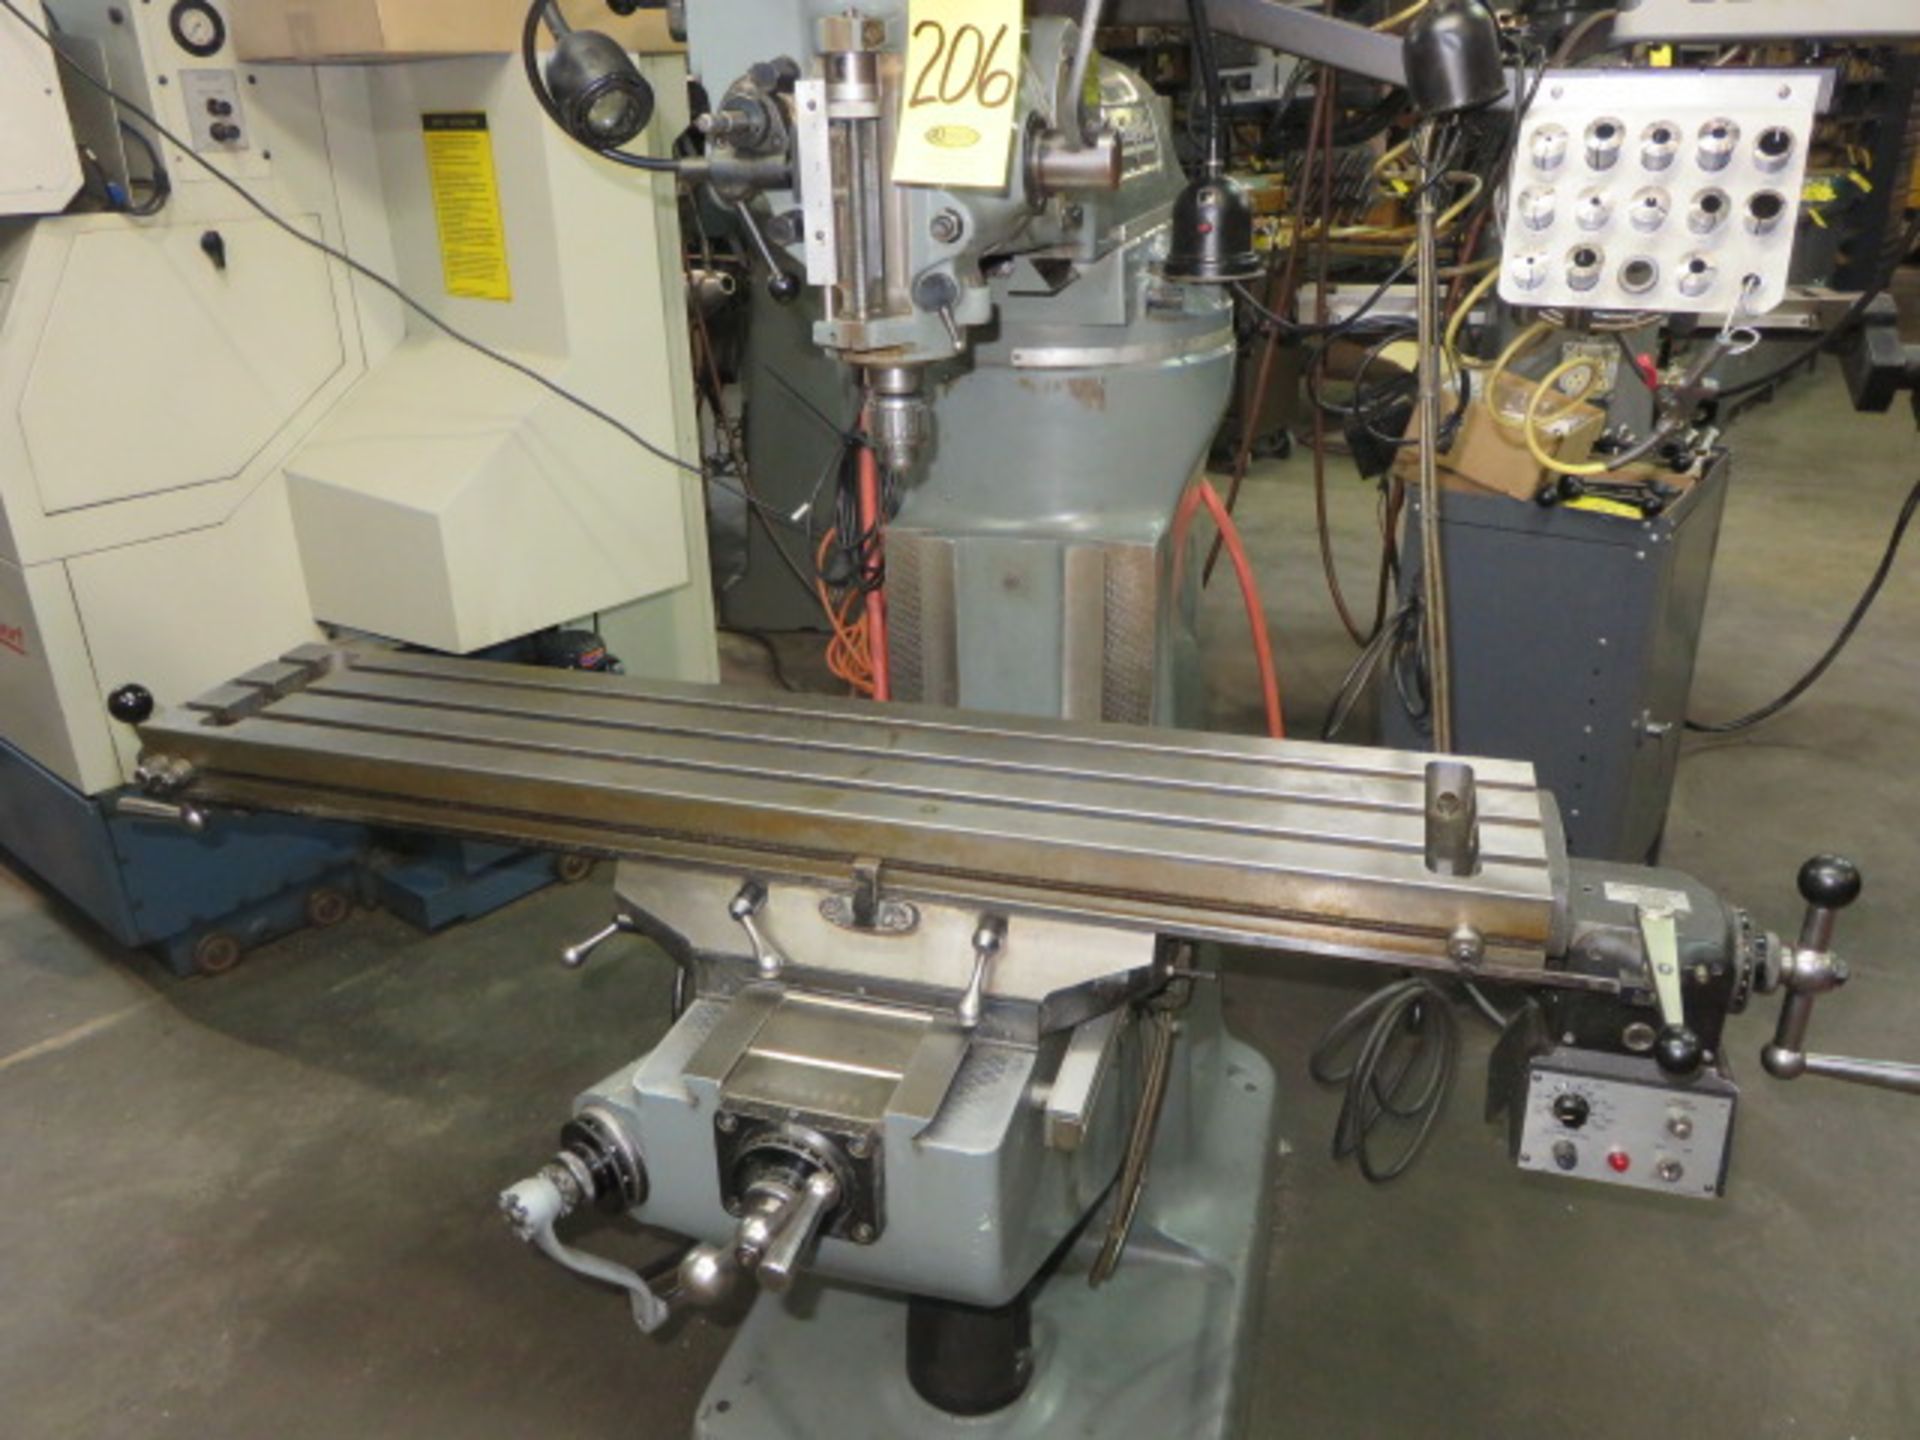 2008 BRIDGEPORT (HARDINGE) 2J VS VERTICAL MILL, S/N HDNG 3926, 2HP, 9 IN. X 48 IN. PF TABLE WITH… - Image 3 of 5